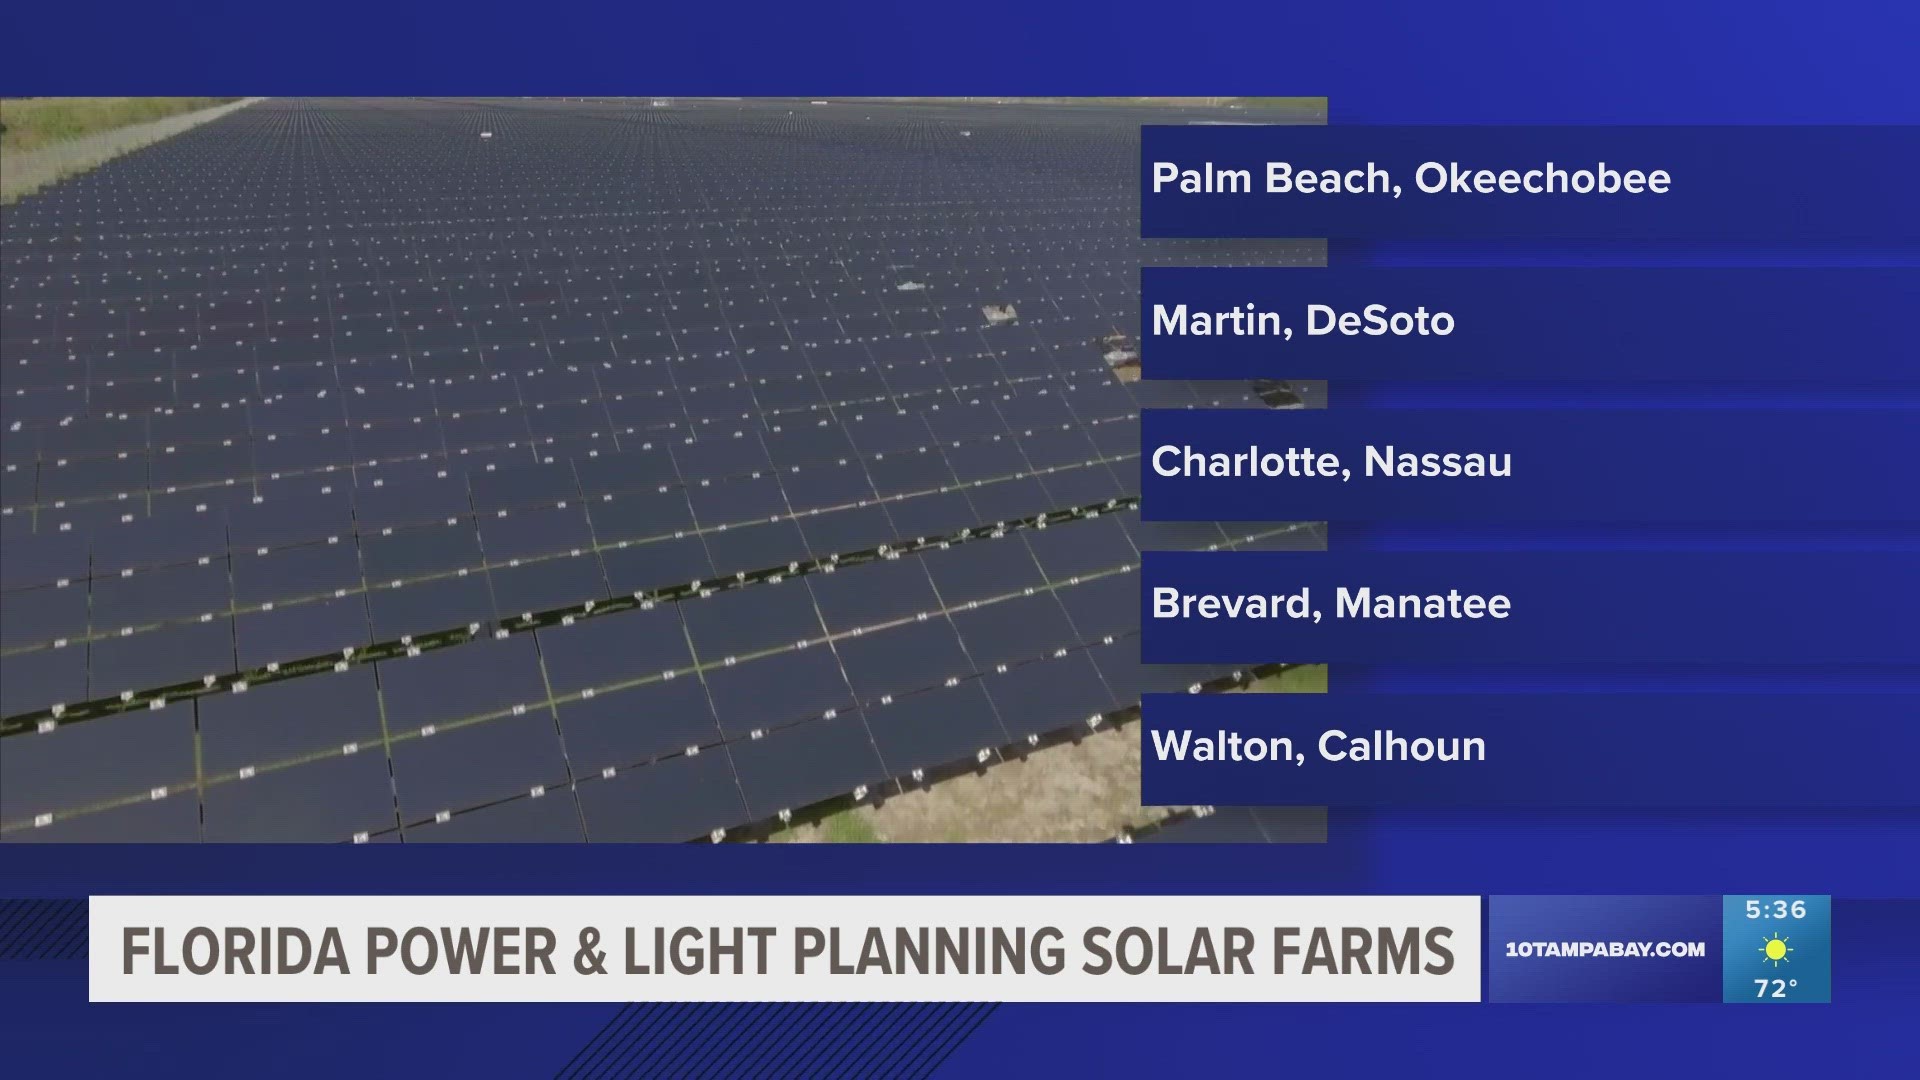 They are asking to move forward with 12 new solar-energy facilities. If approved, FPL says it will have 11 counties with an operational site by January 2025.